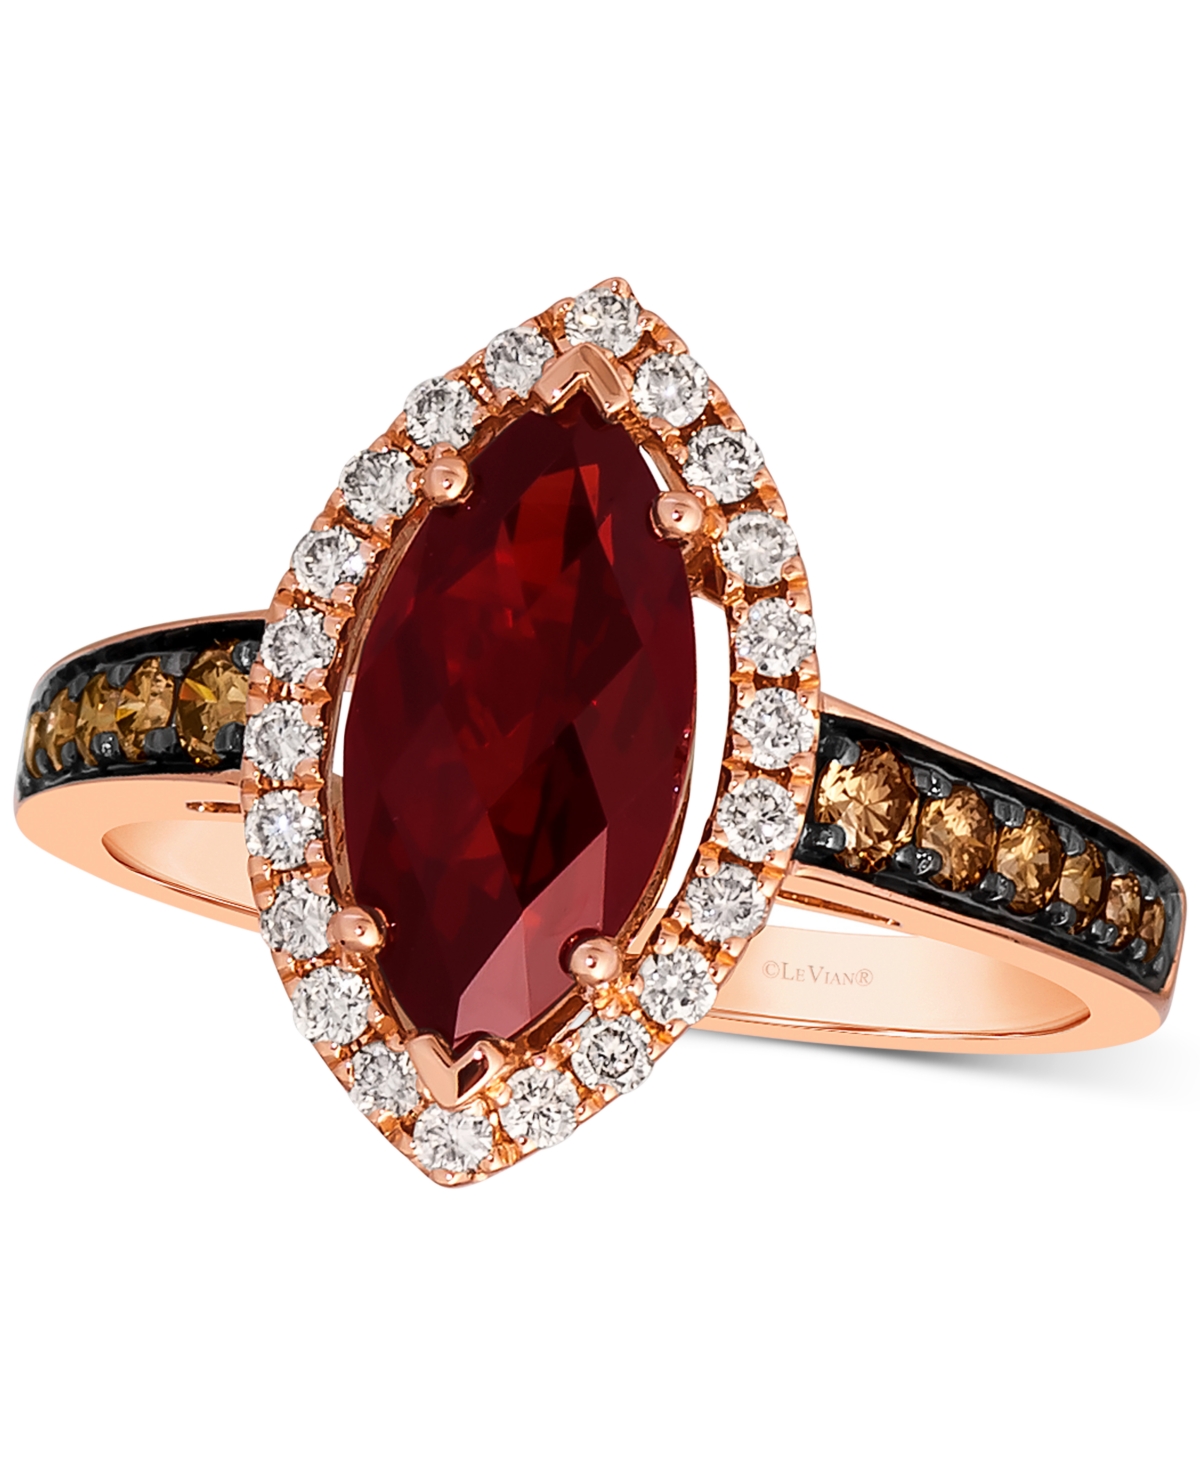 Le Vian Pomegranate Garnet (2 Ct. T.w.) & Diamond (1/2 Ct. T.w.) Halo Ring In 14k Rose Gold In K Strawberry Gold Ring